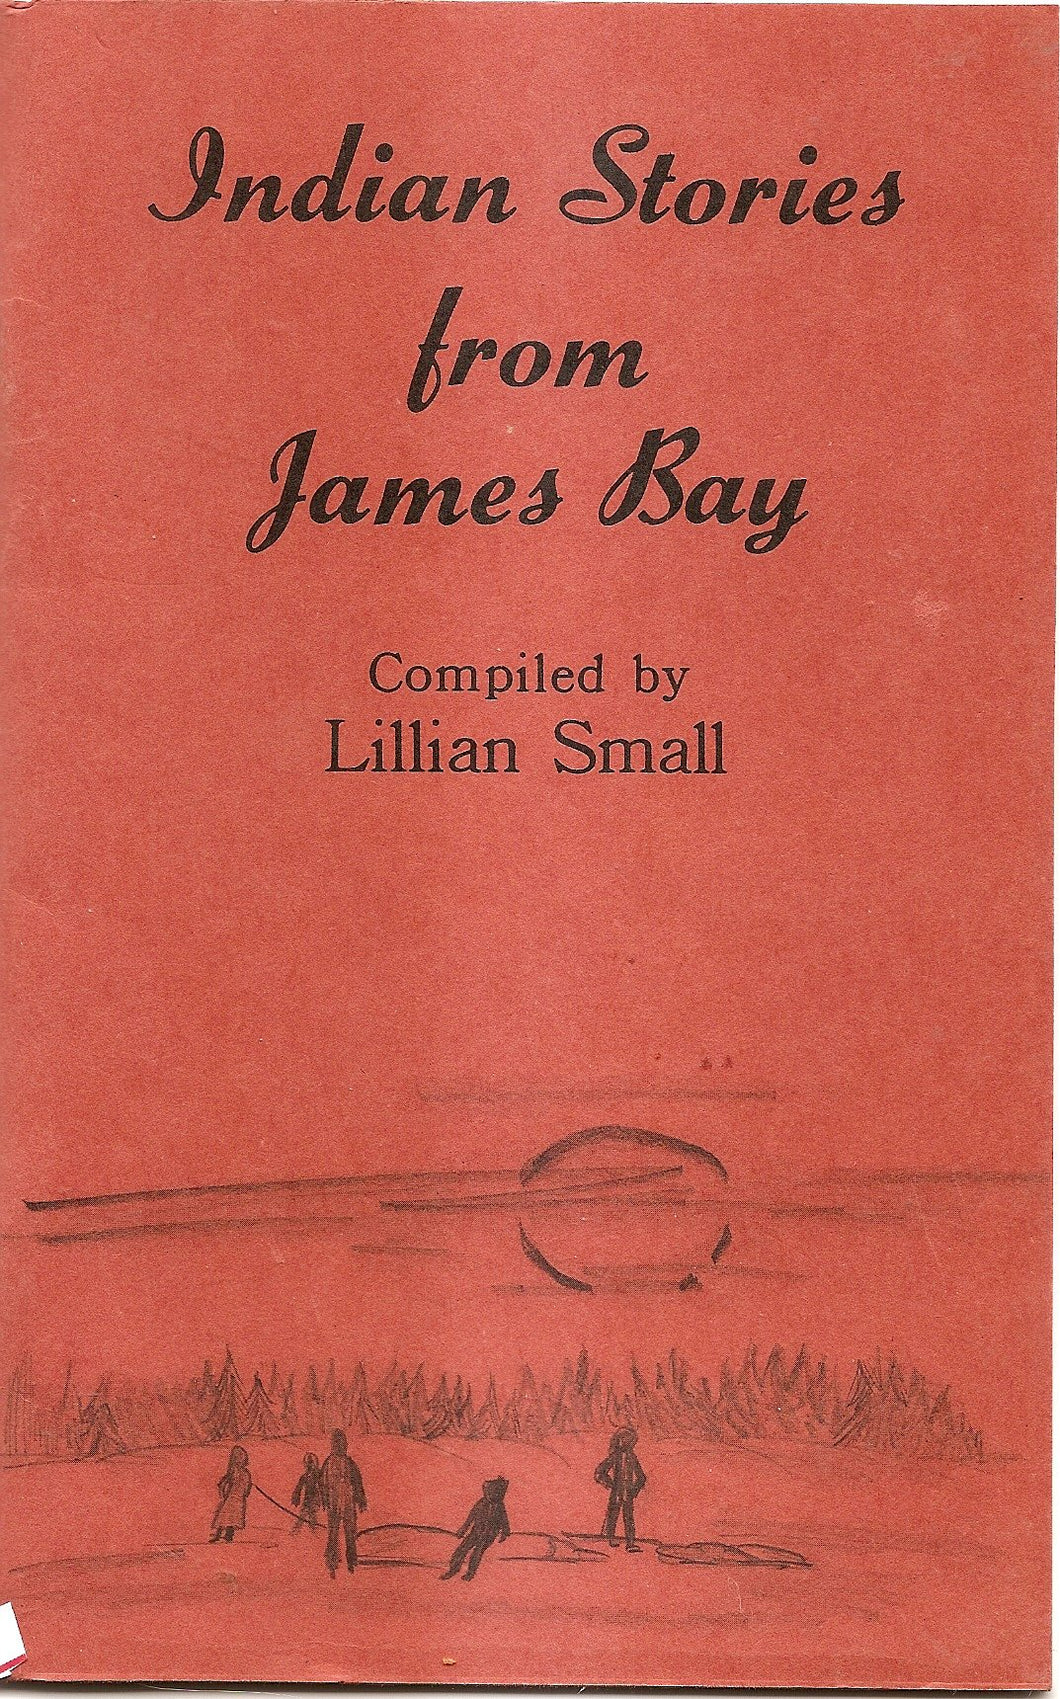 Indian Stories from James Bay